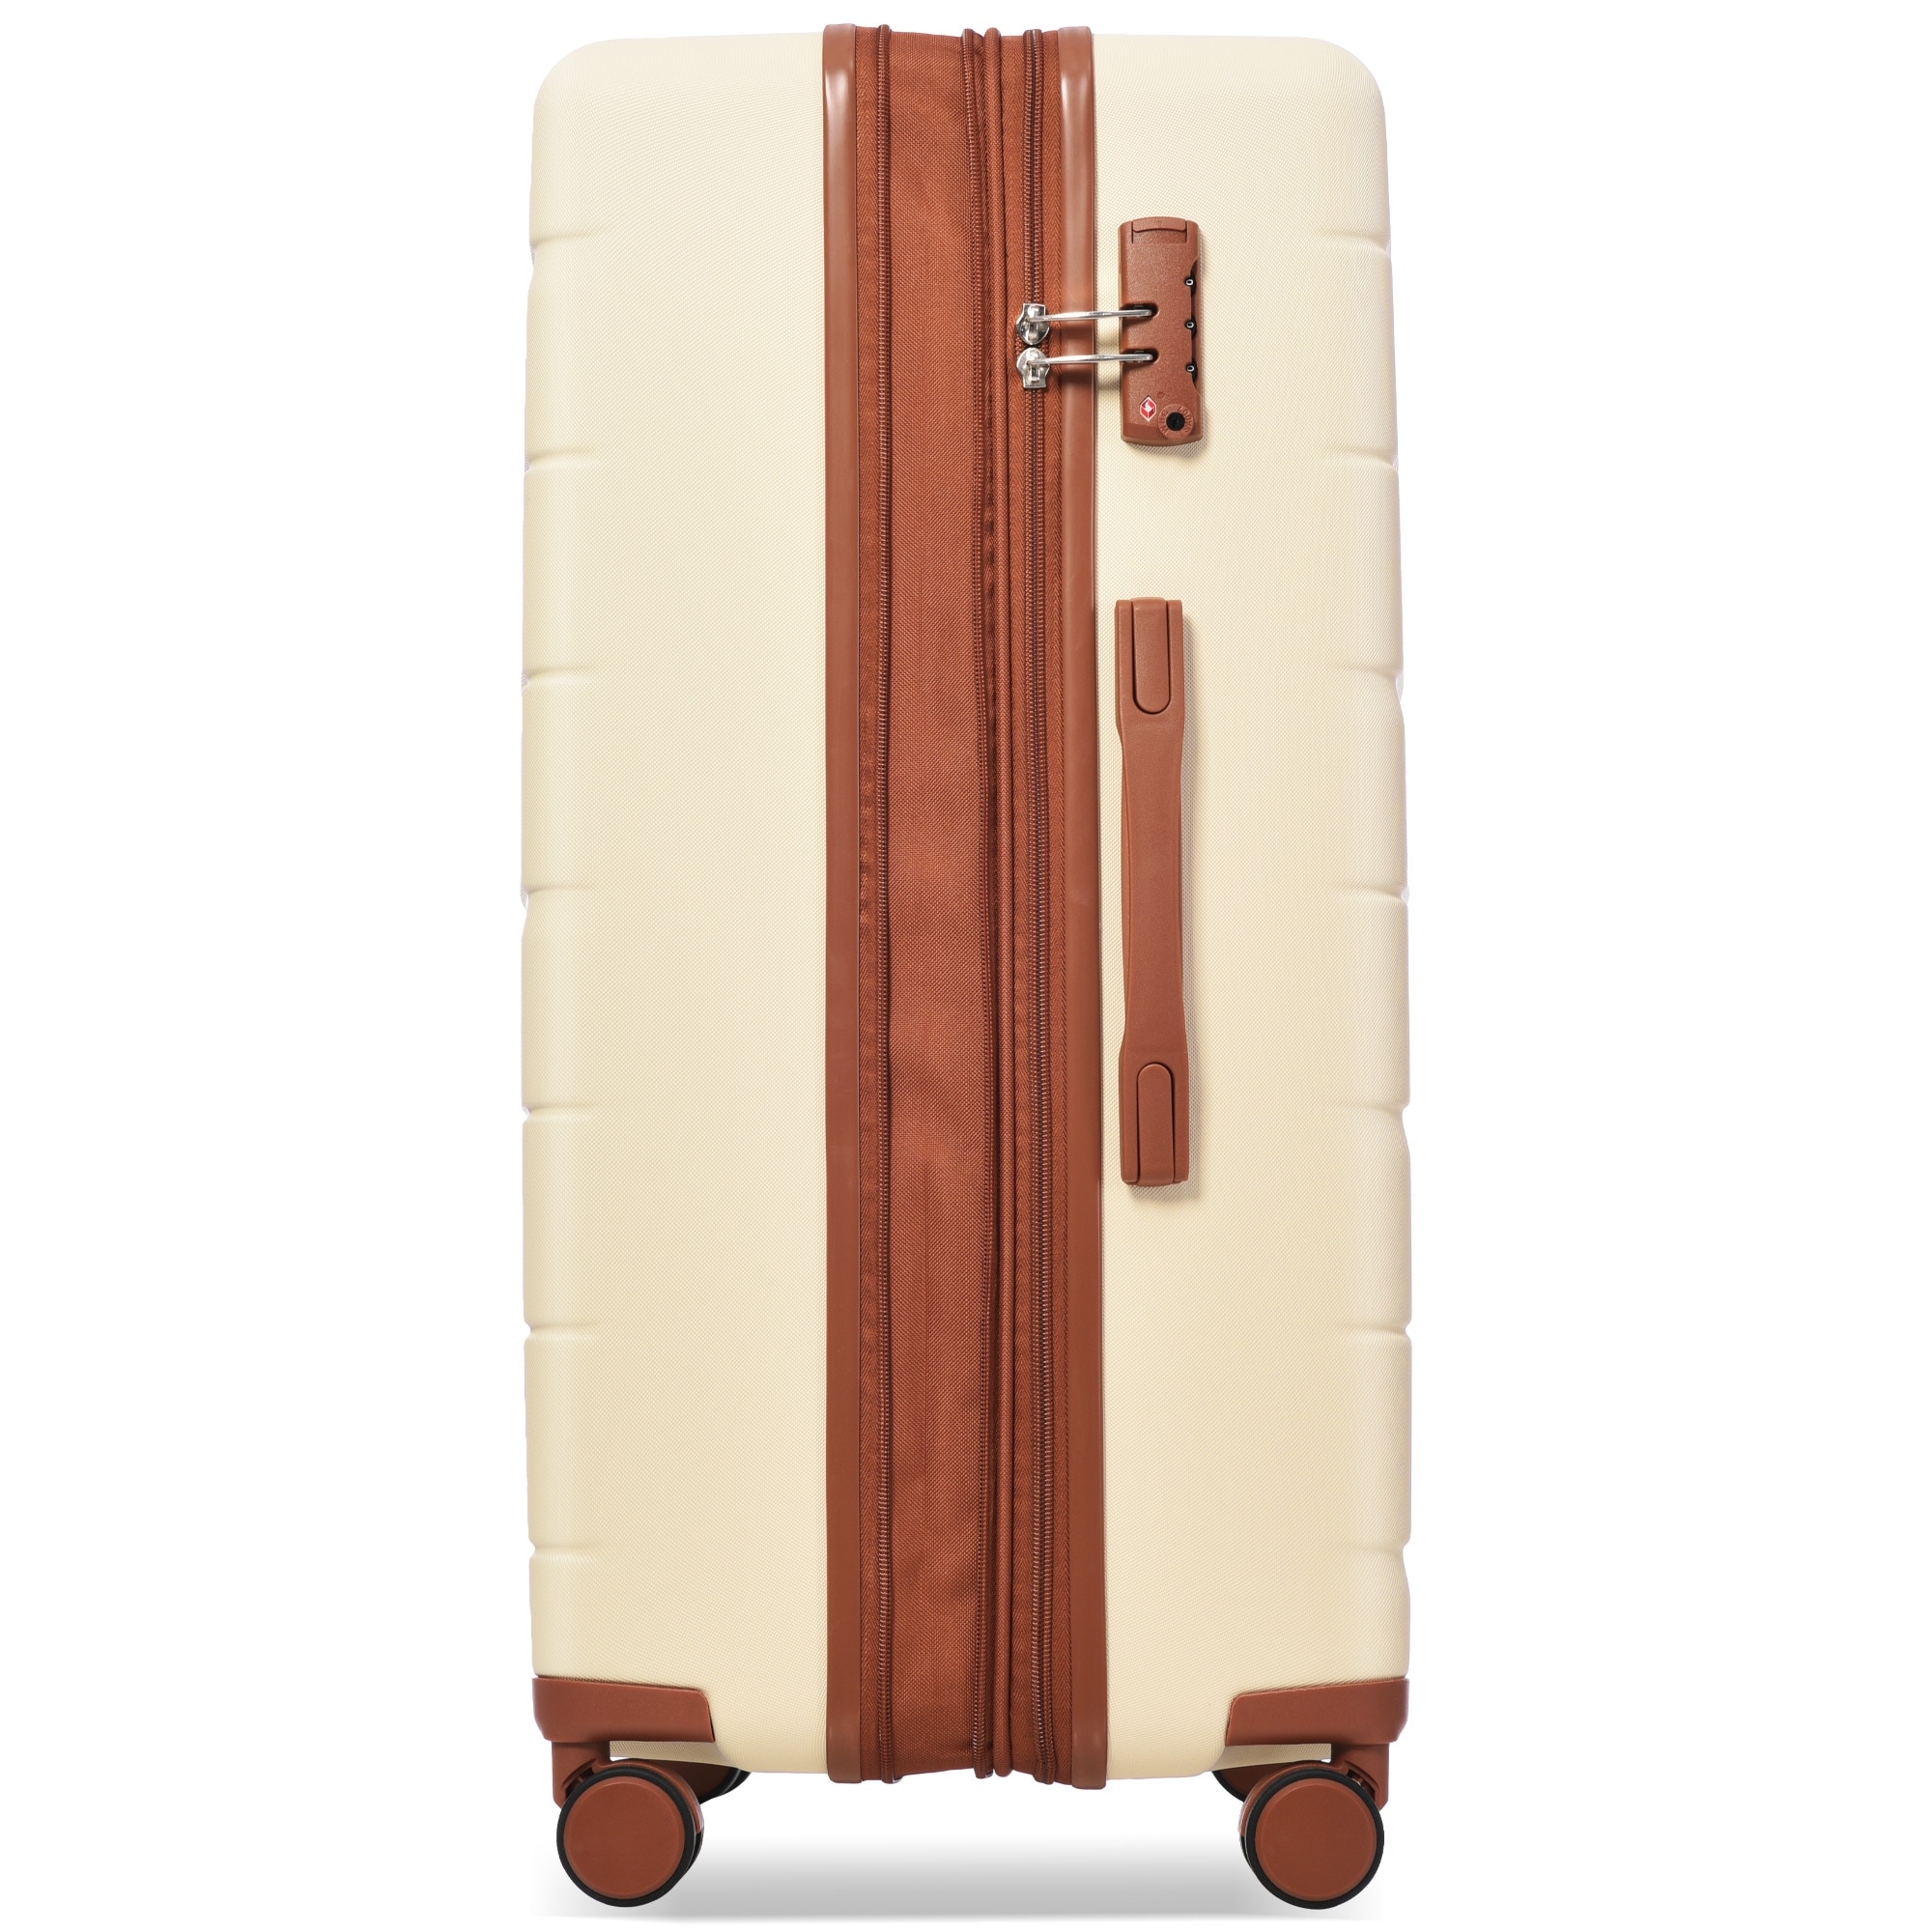 https://ak1.ostkcdn.com/images/products/is/images/direct/d403188cb2125a7e2ef2f2c46b306cbf9e545fa9/3-Pieces-New-Modern-Luggage-Sets-Suitcase-Set-20-24-28-In%2C-Carry-on-Luggage%2C-Hard-Case-Trunk-with-Spinner-Wheels.jpg